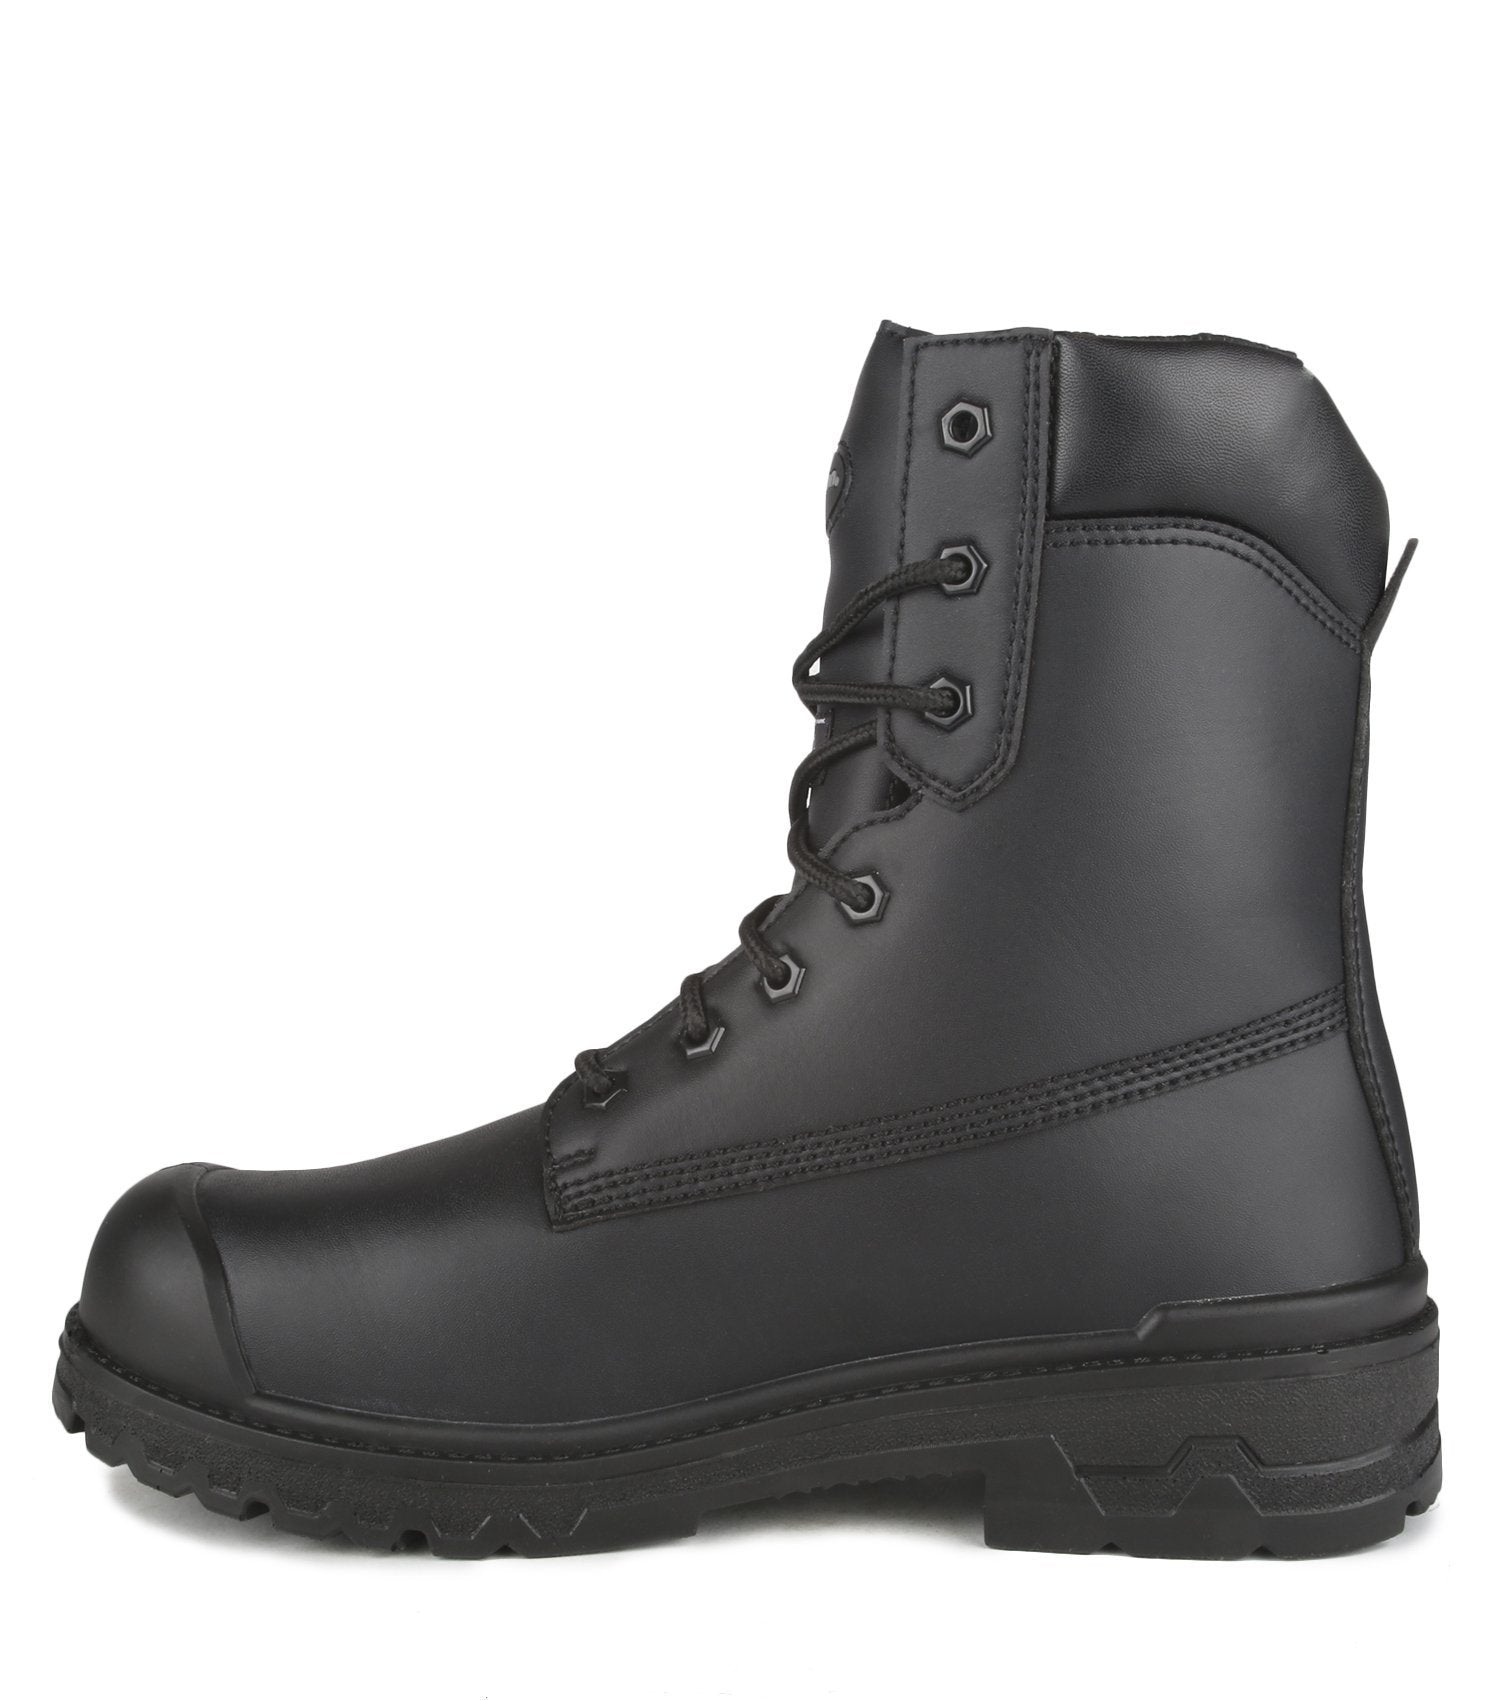 Acton Prospect 8" Chemtech Safety Work Boots | Black | Size 7 to Size 14 Work Boots - Cleanflow